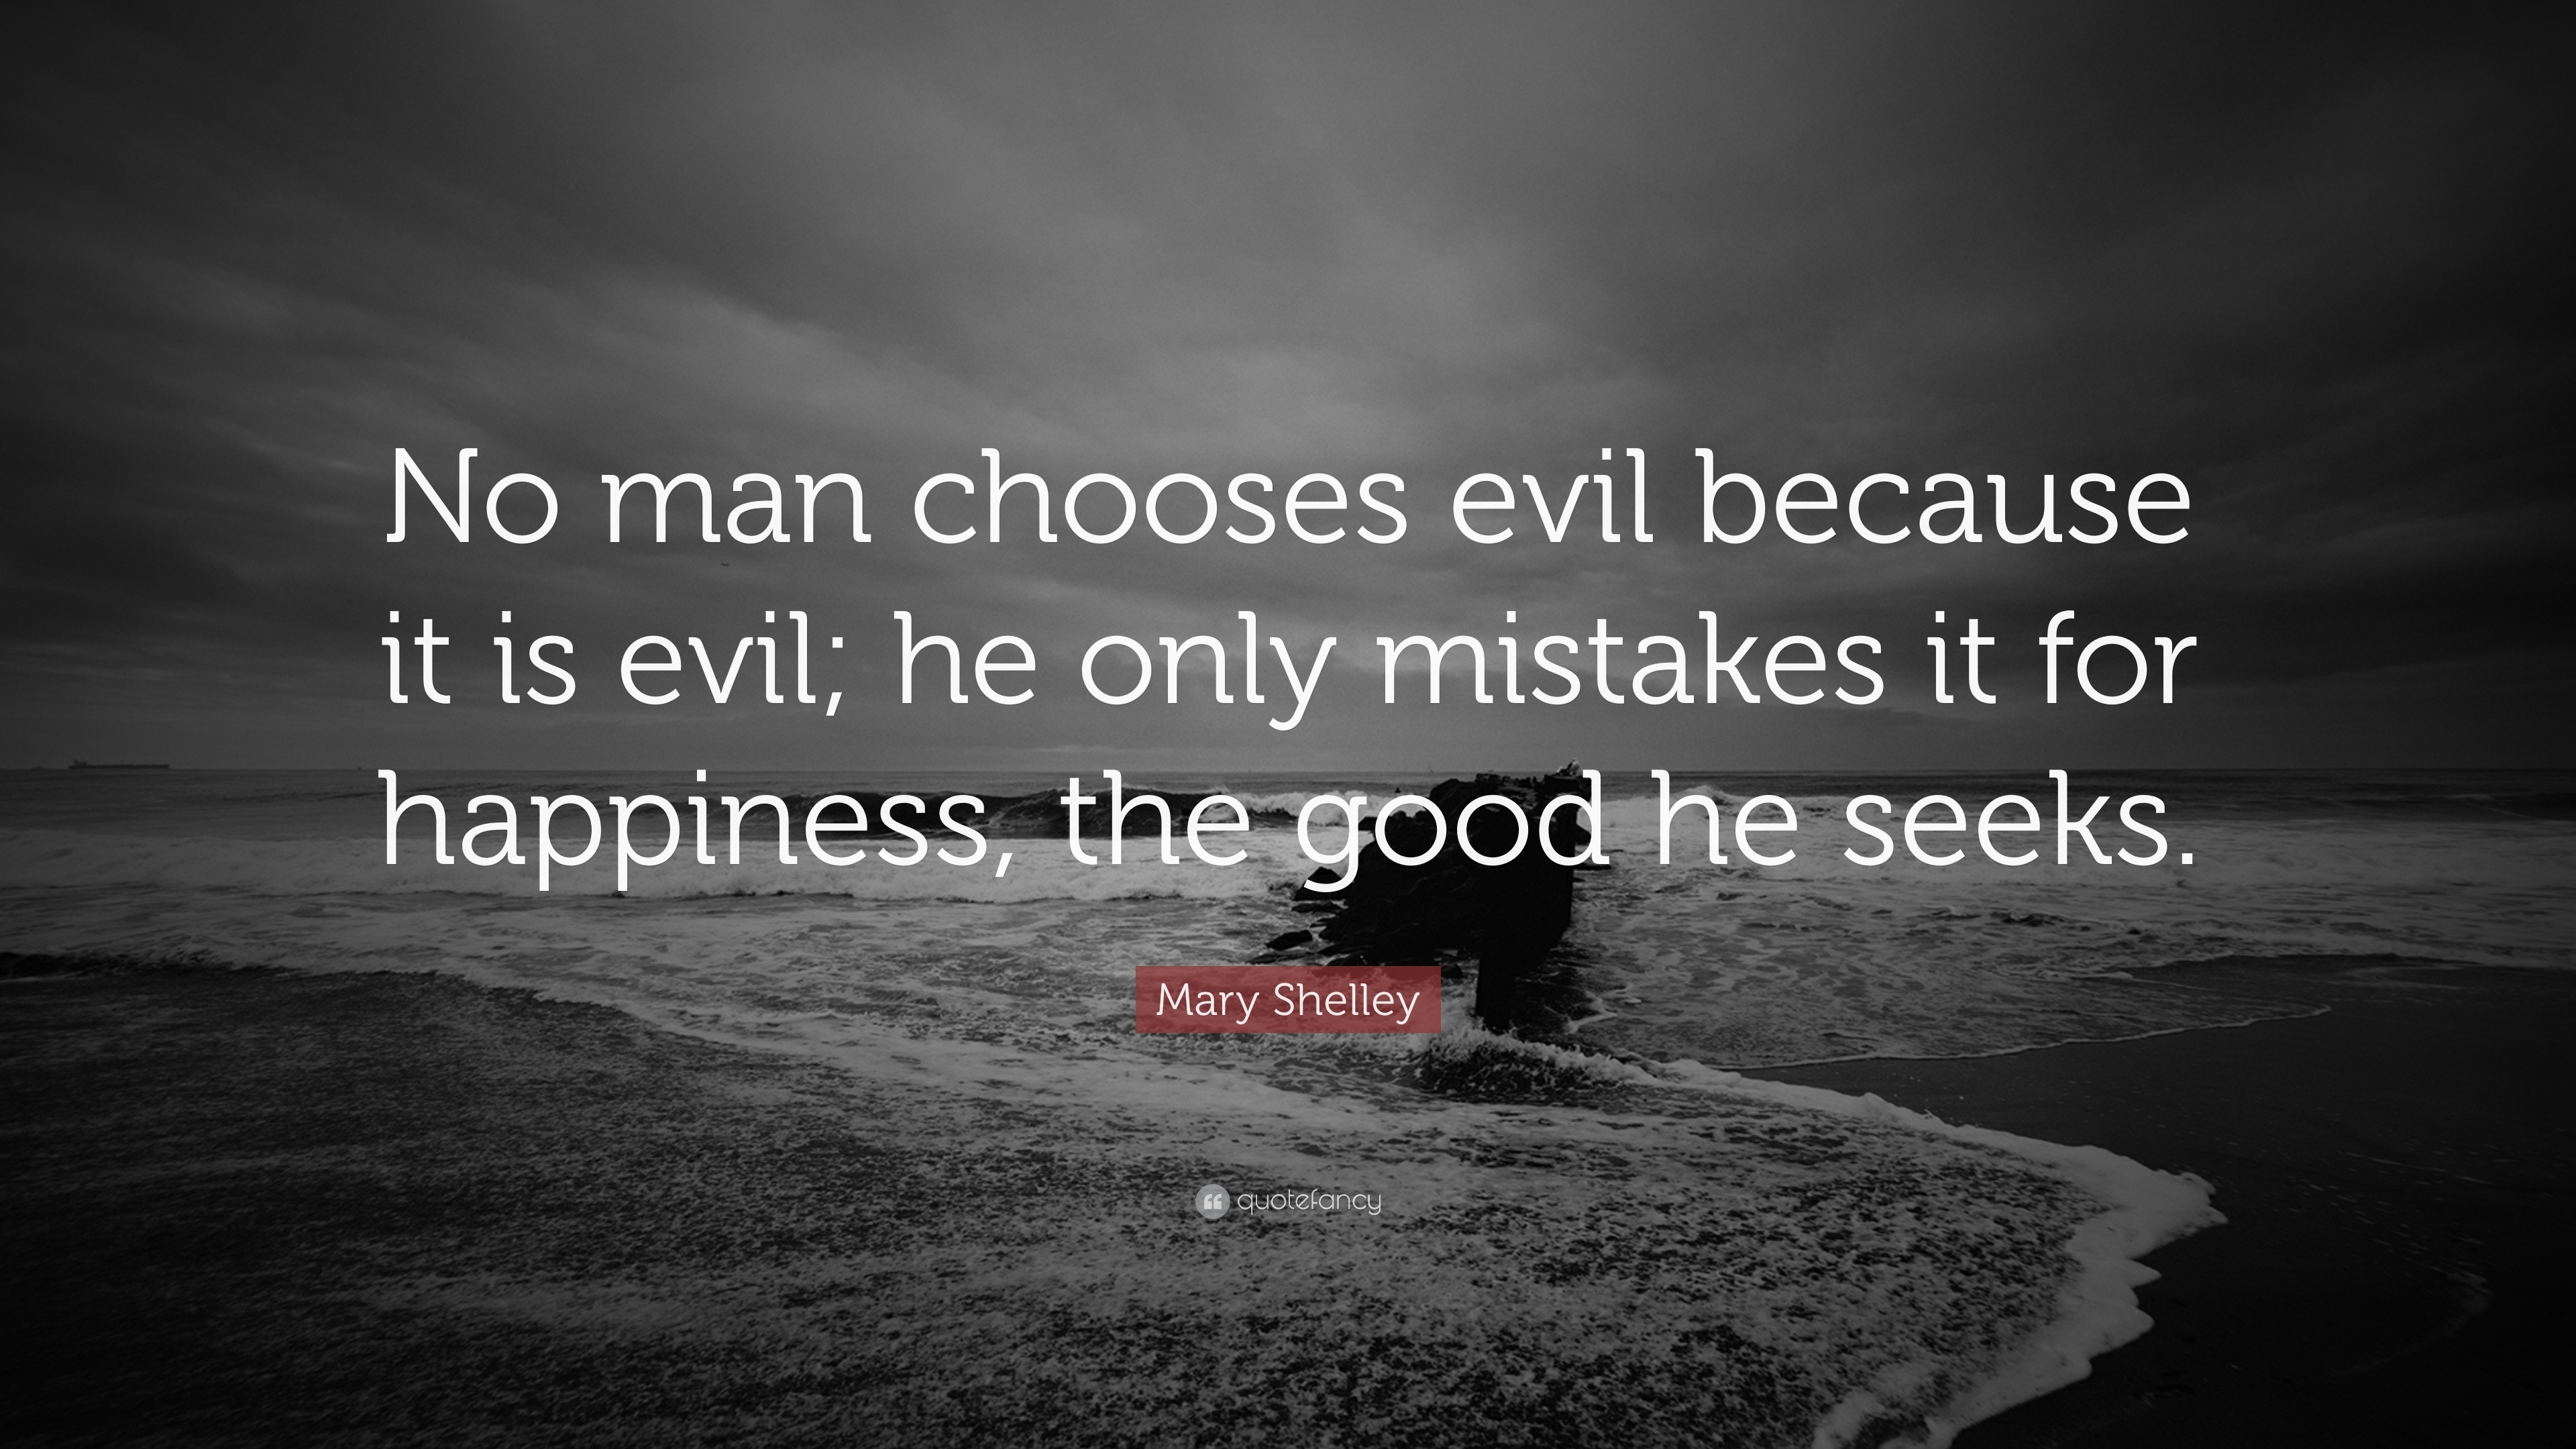 Mary Shelley Quote: "No man chooses evil because it is evil; he only mistakes it for happiness ...